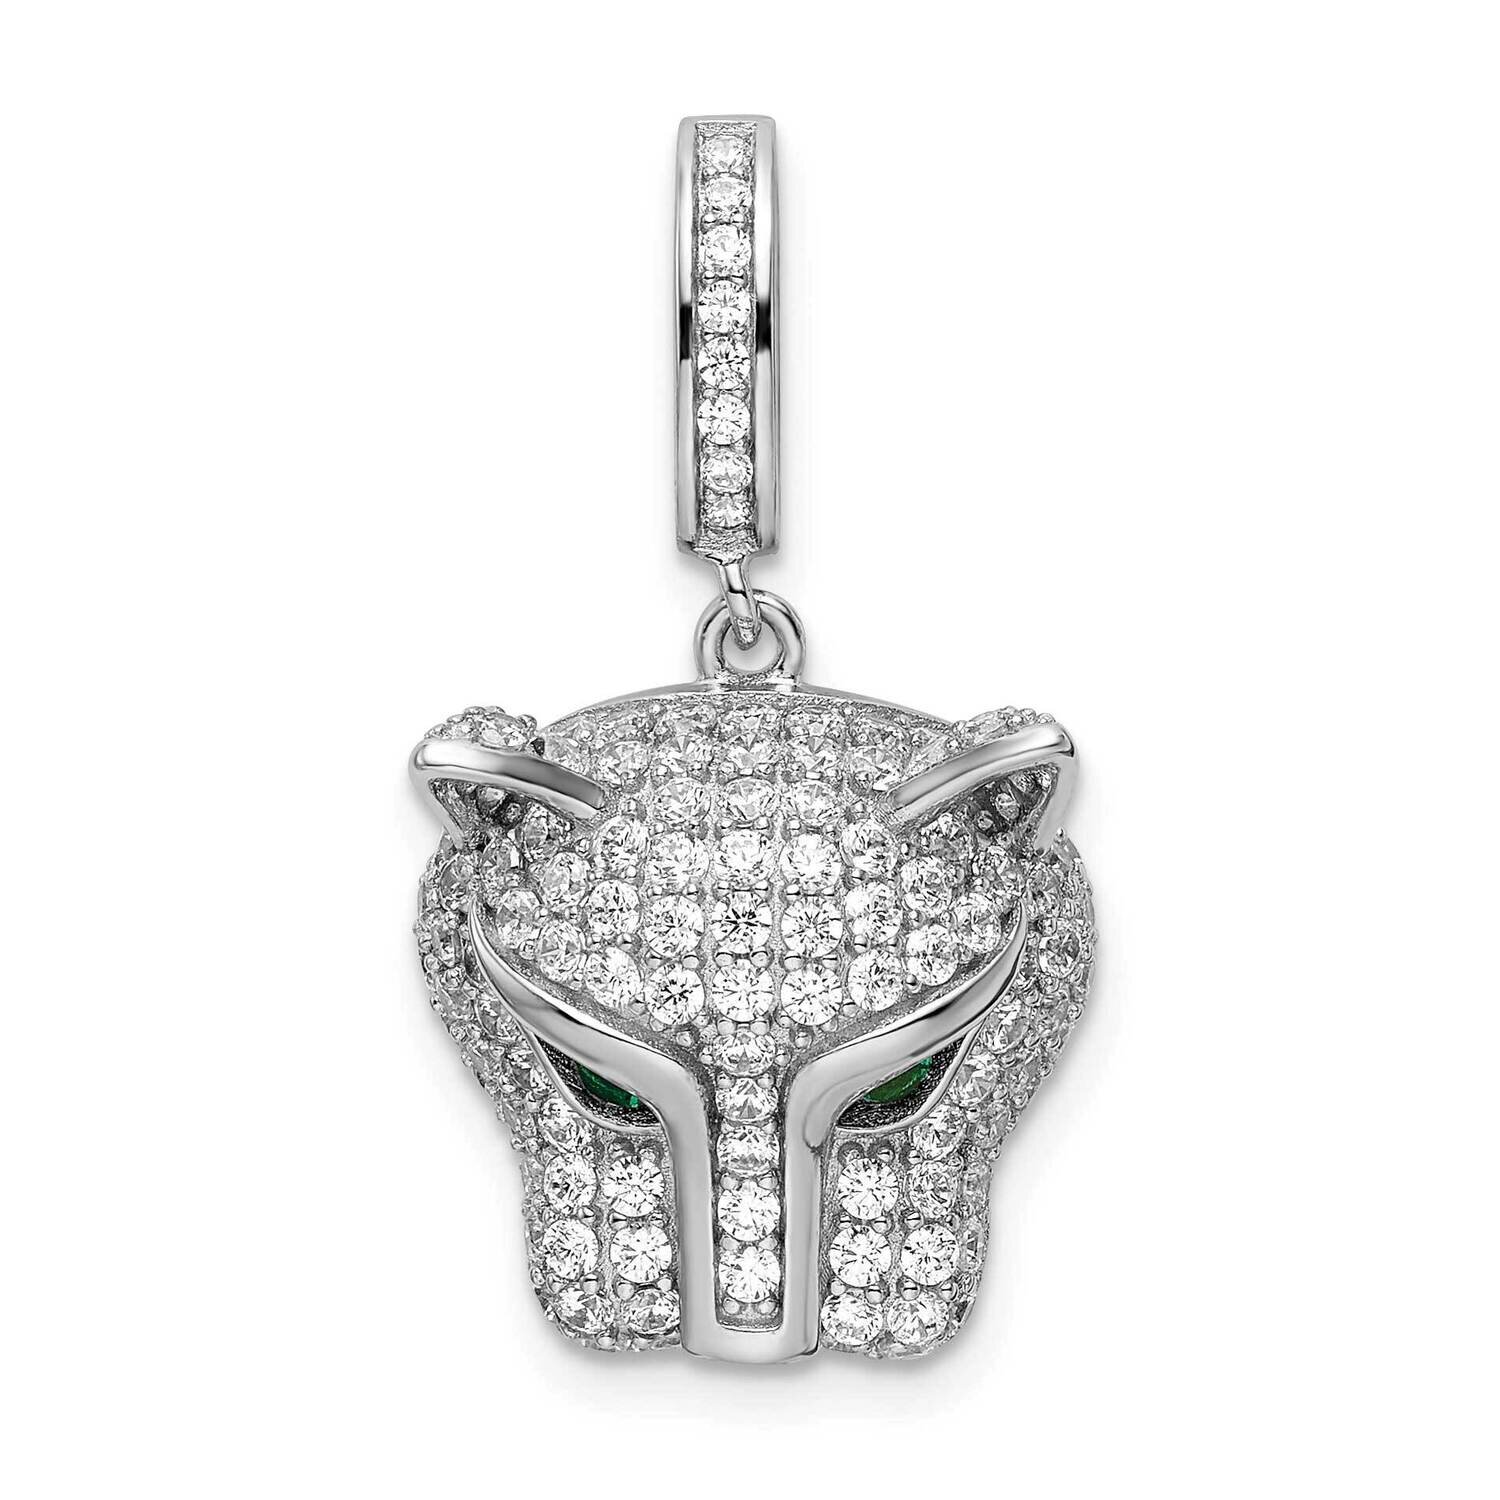 Green & White CZ Diamond Panther Pendant Sterling Silver Rhodium-Plated QP5505